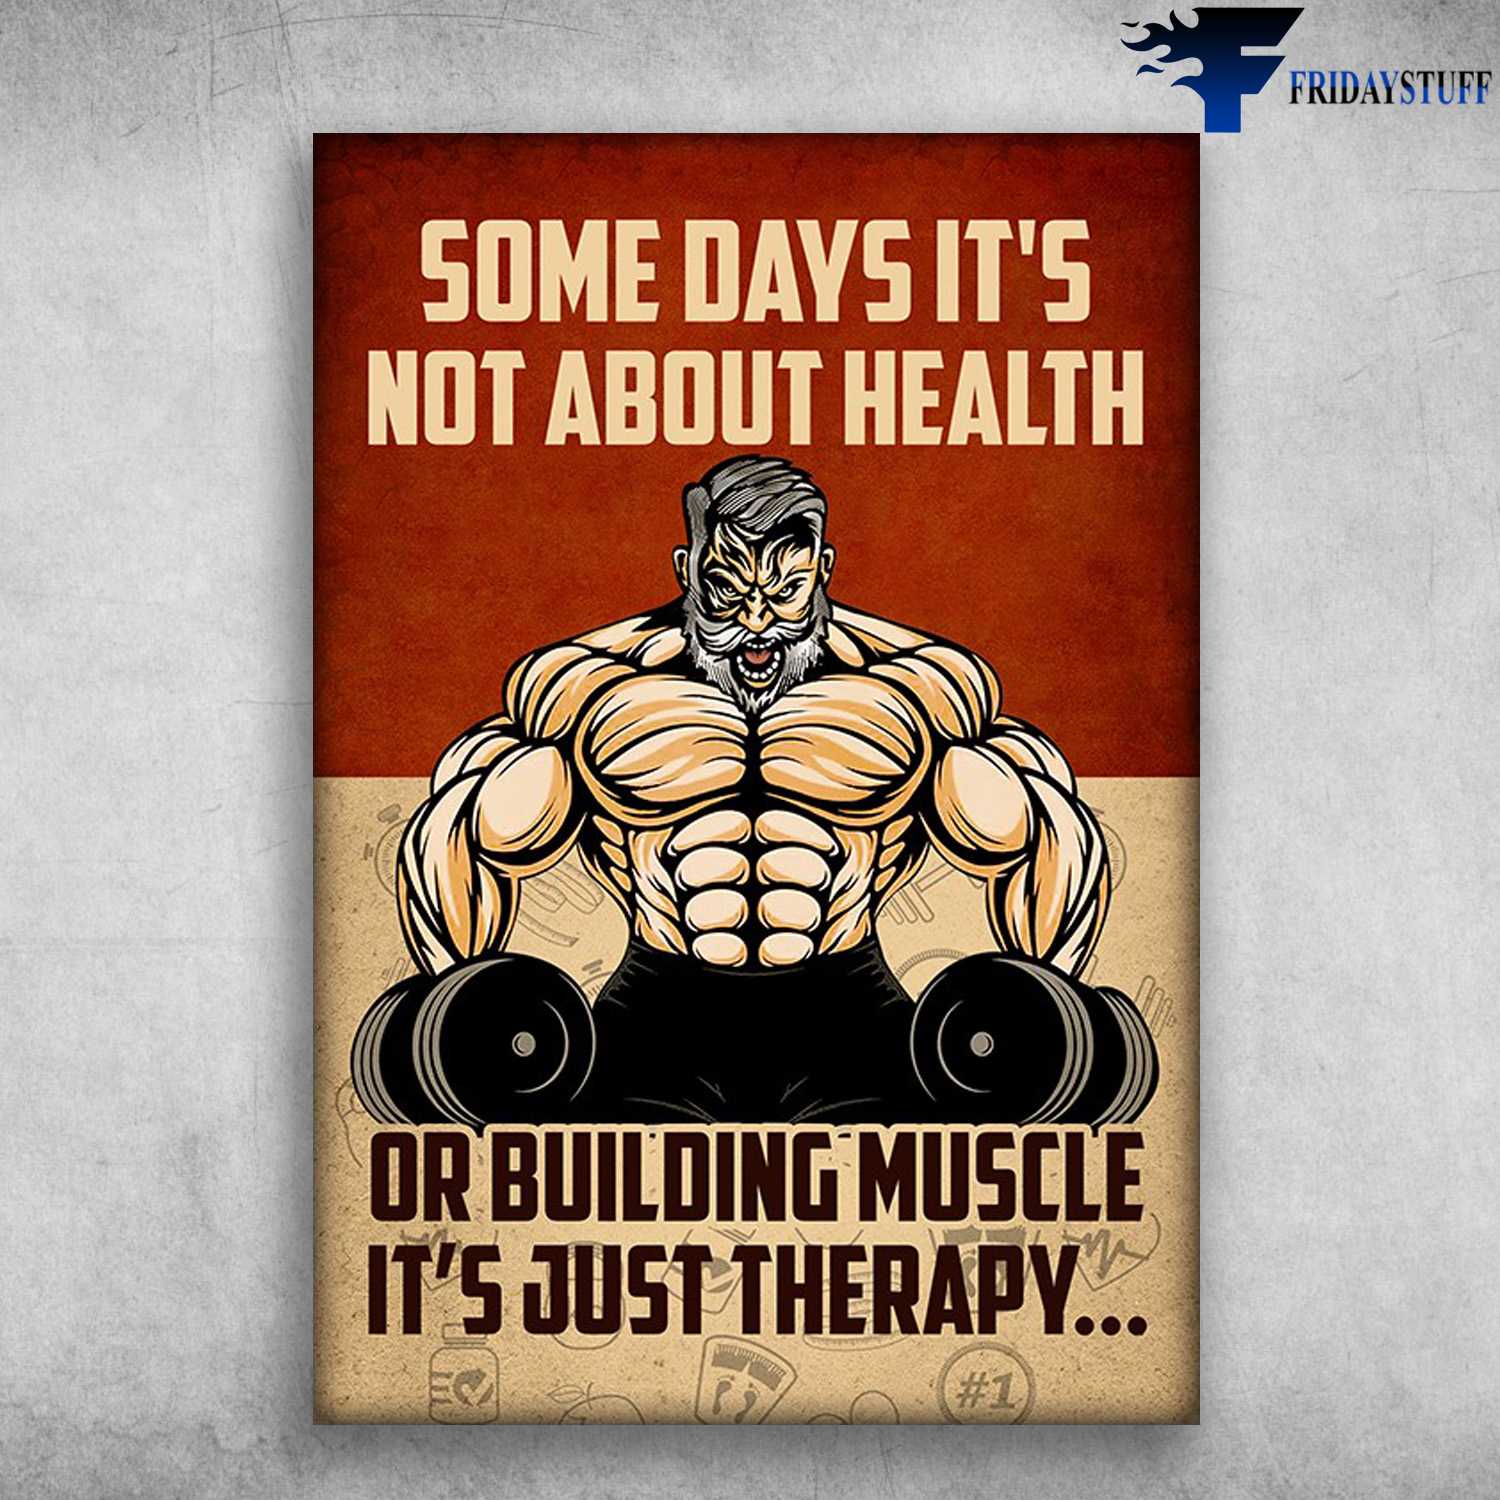 Old Man Gym, Bodybuilding Man, Weightlifting Man - Some Days It's Net About Health, Or Building Muscle, It's Just Therapy